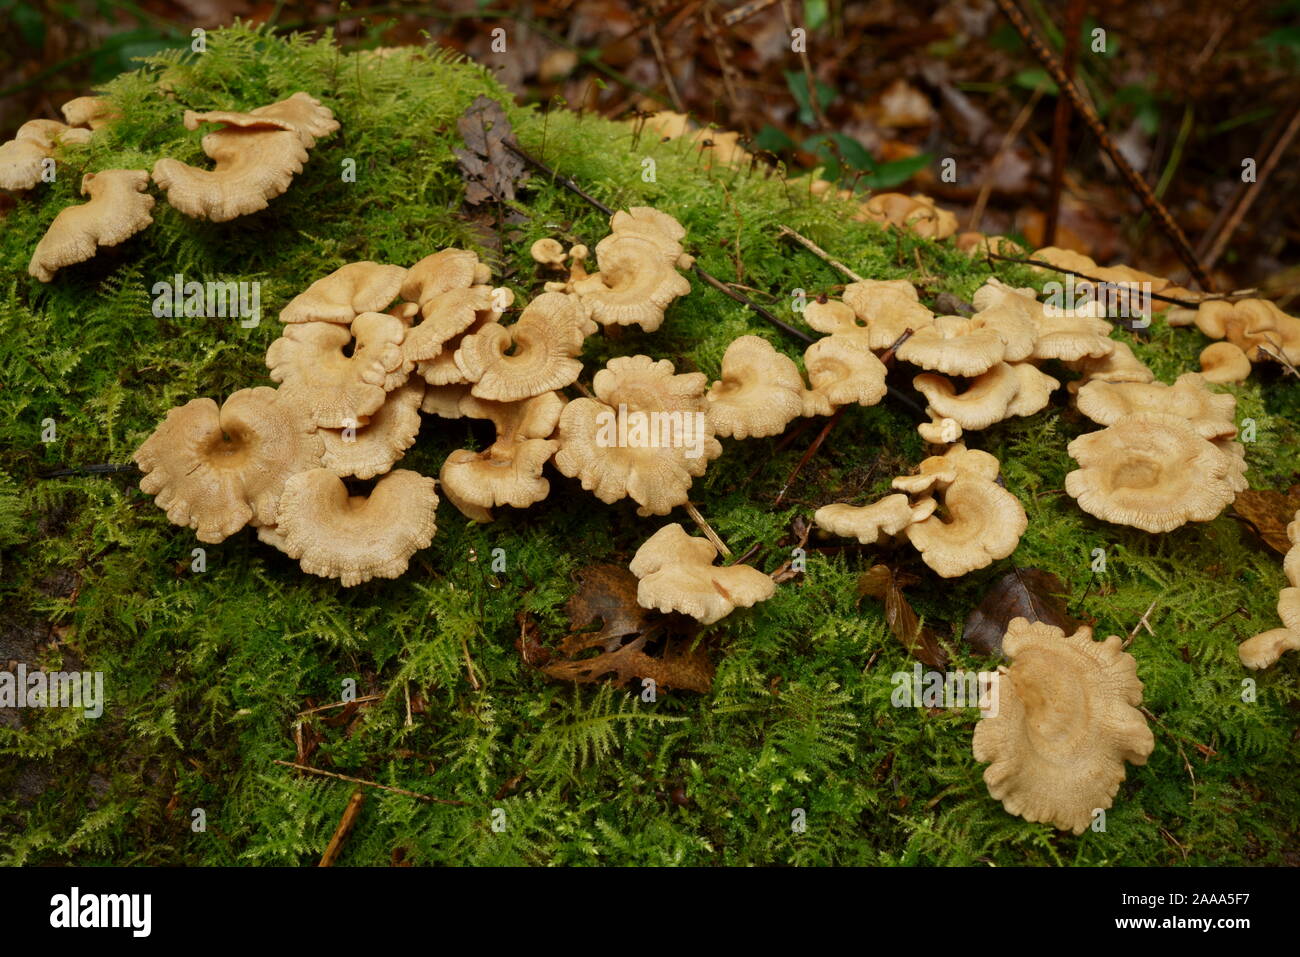 Fungi growing on a moss covered log on Ashdown forest. Stock Photo